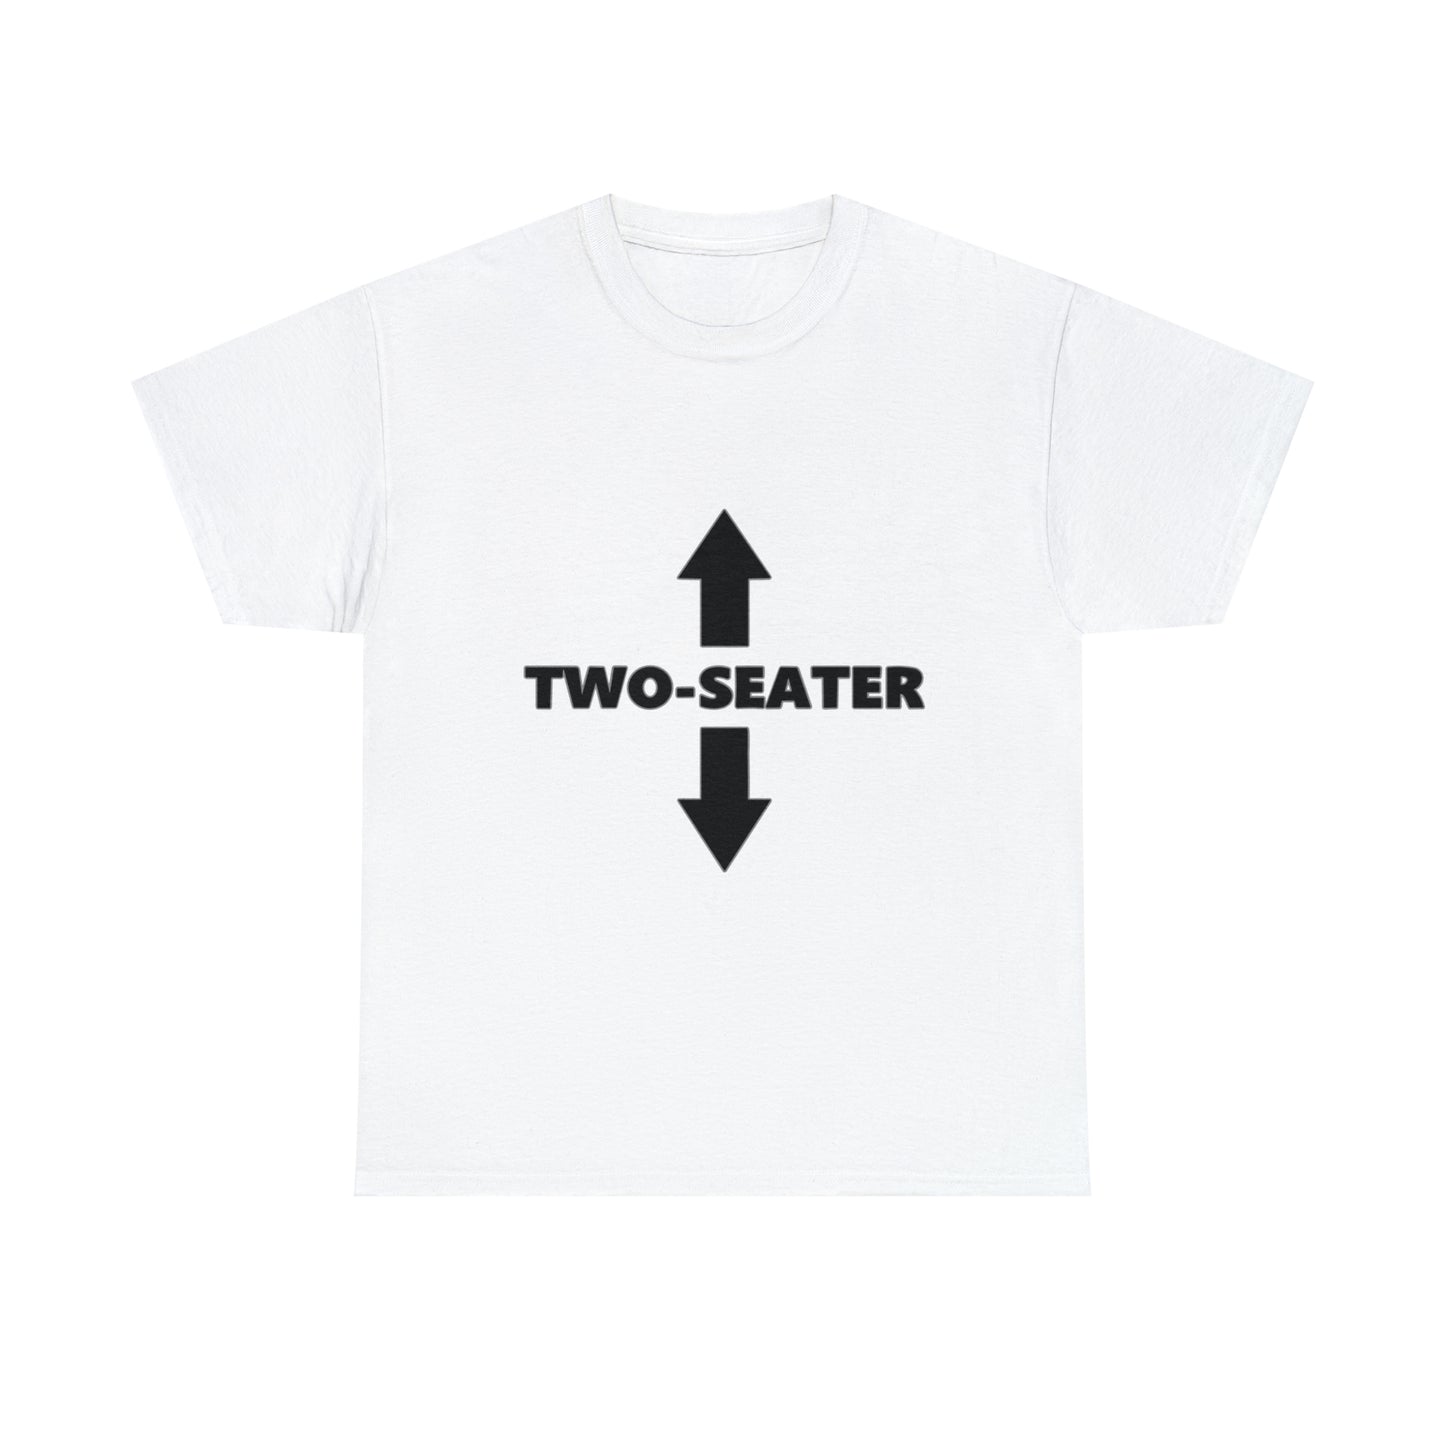 "Two-Seater" Tee